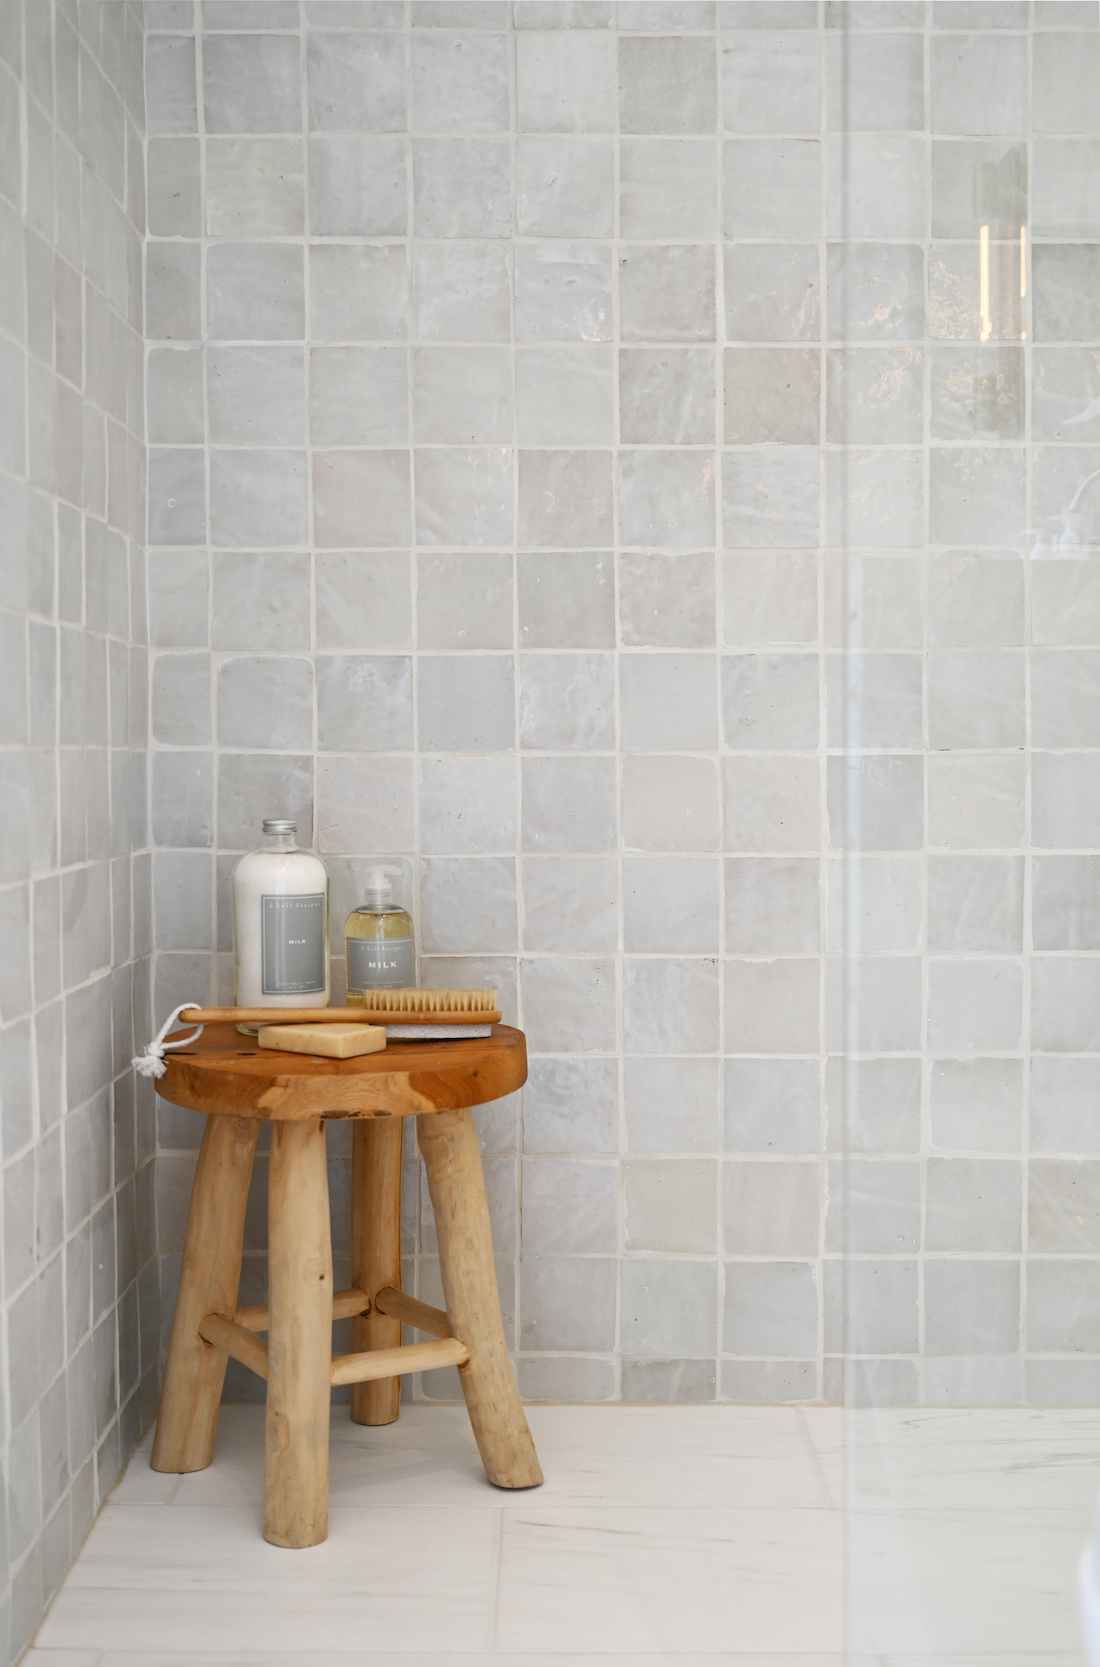 Grey square tiles in bathroom with timber stool